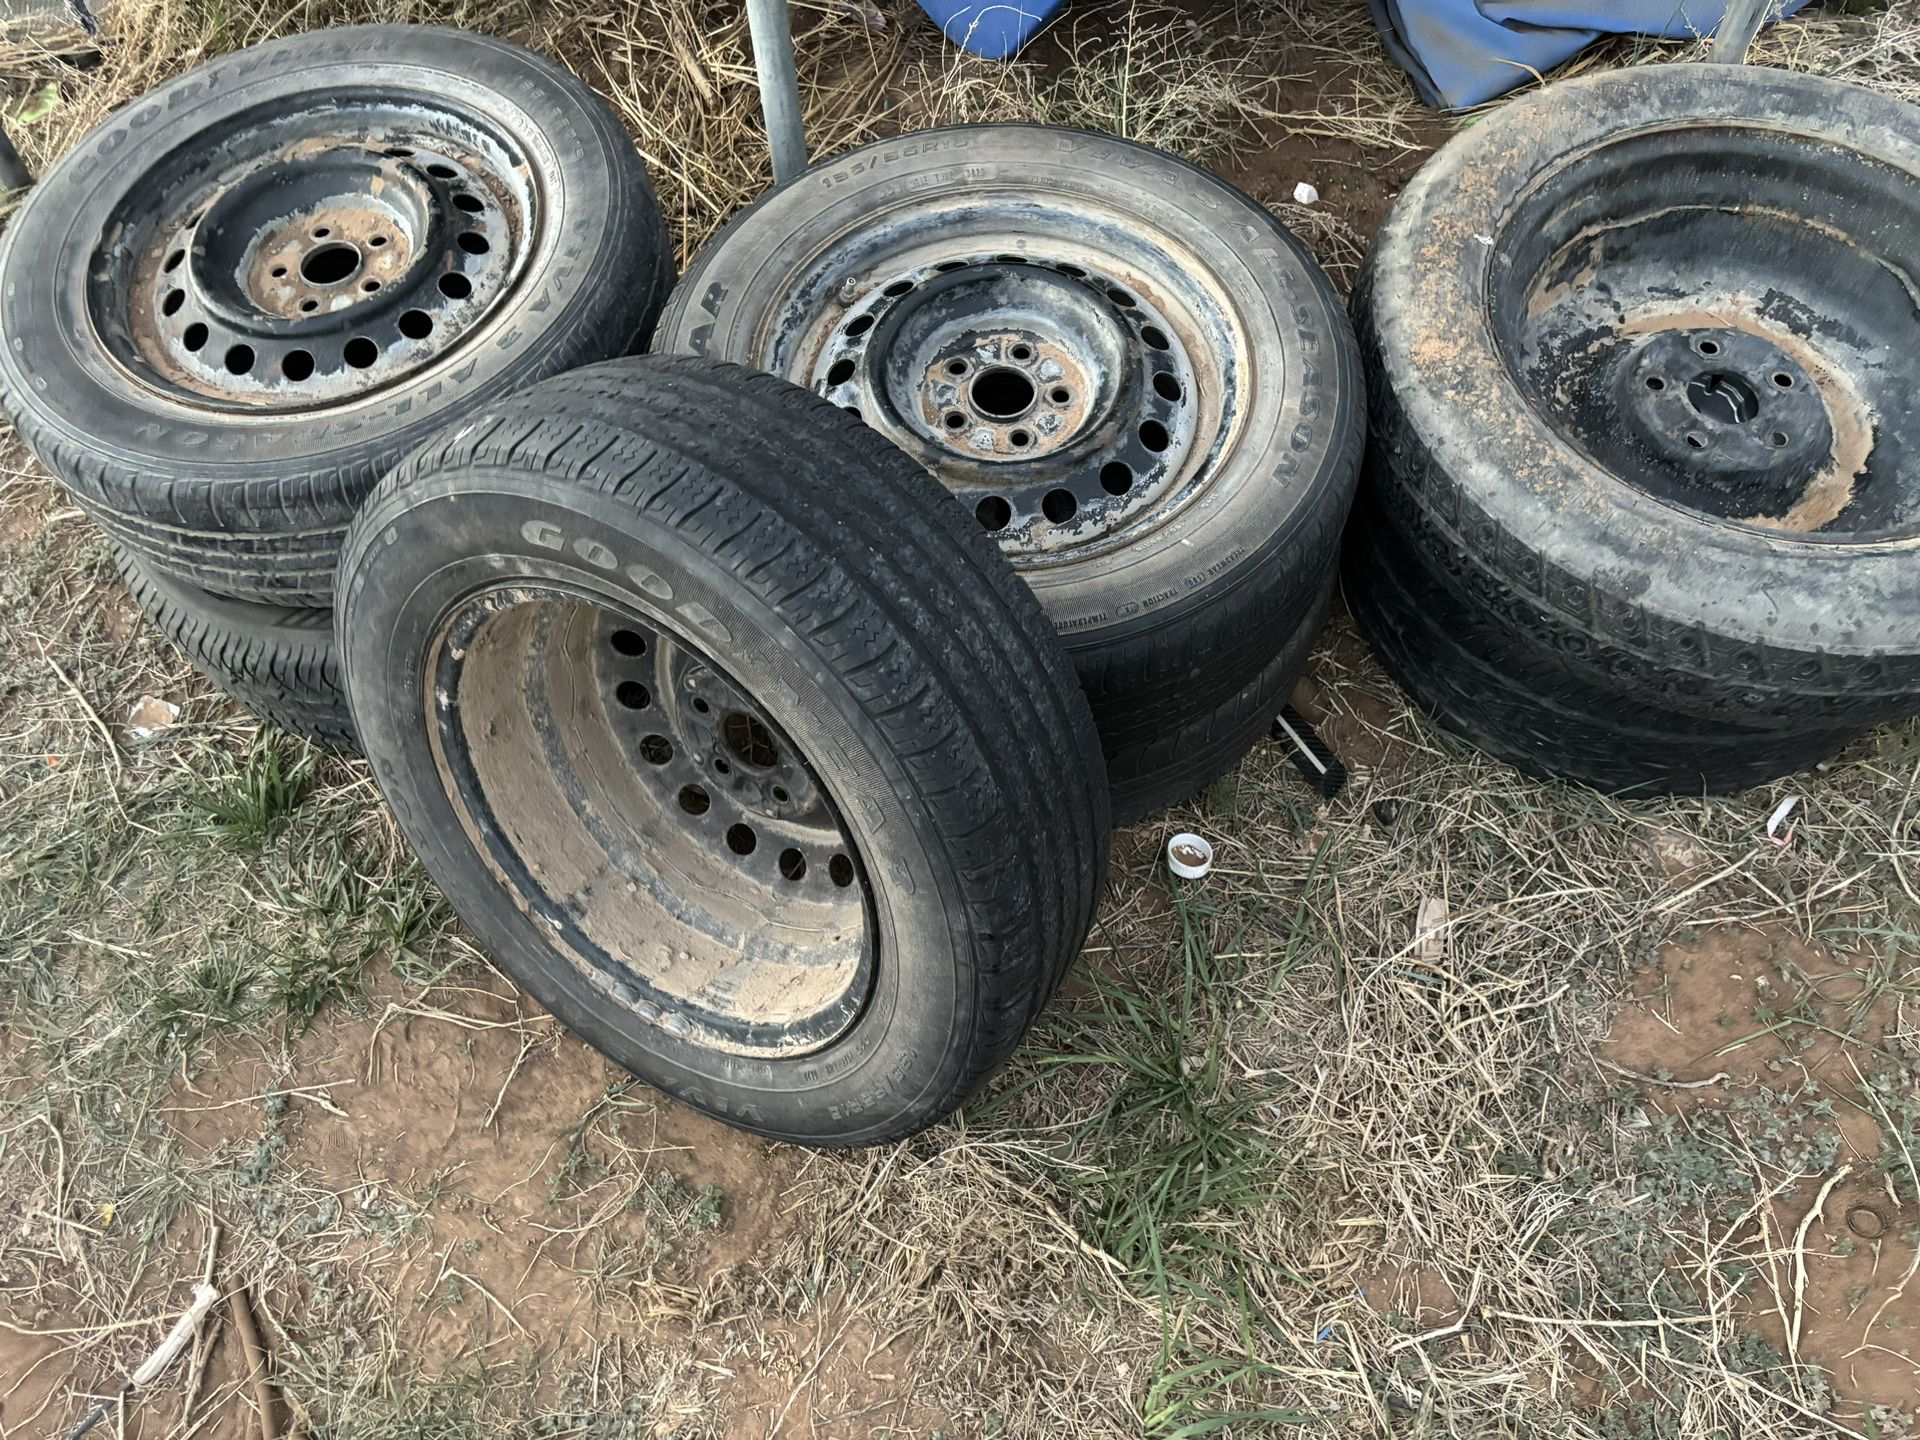 6 Used Tires